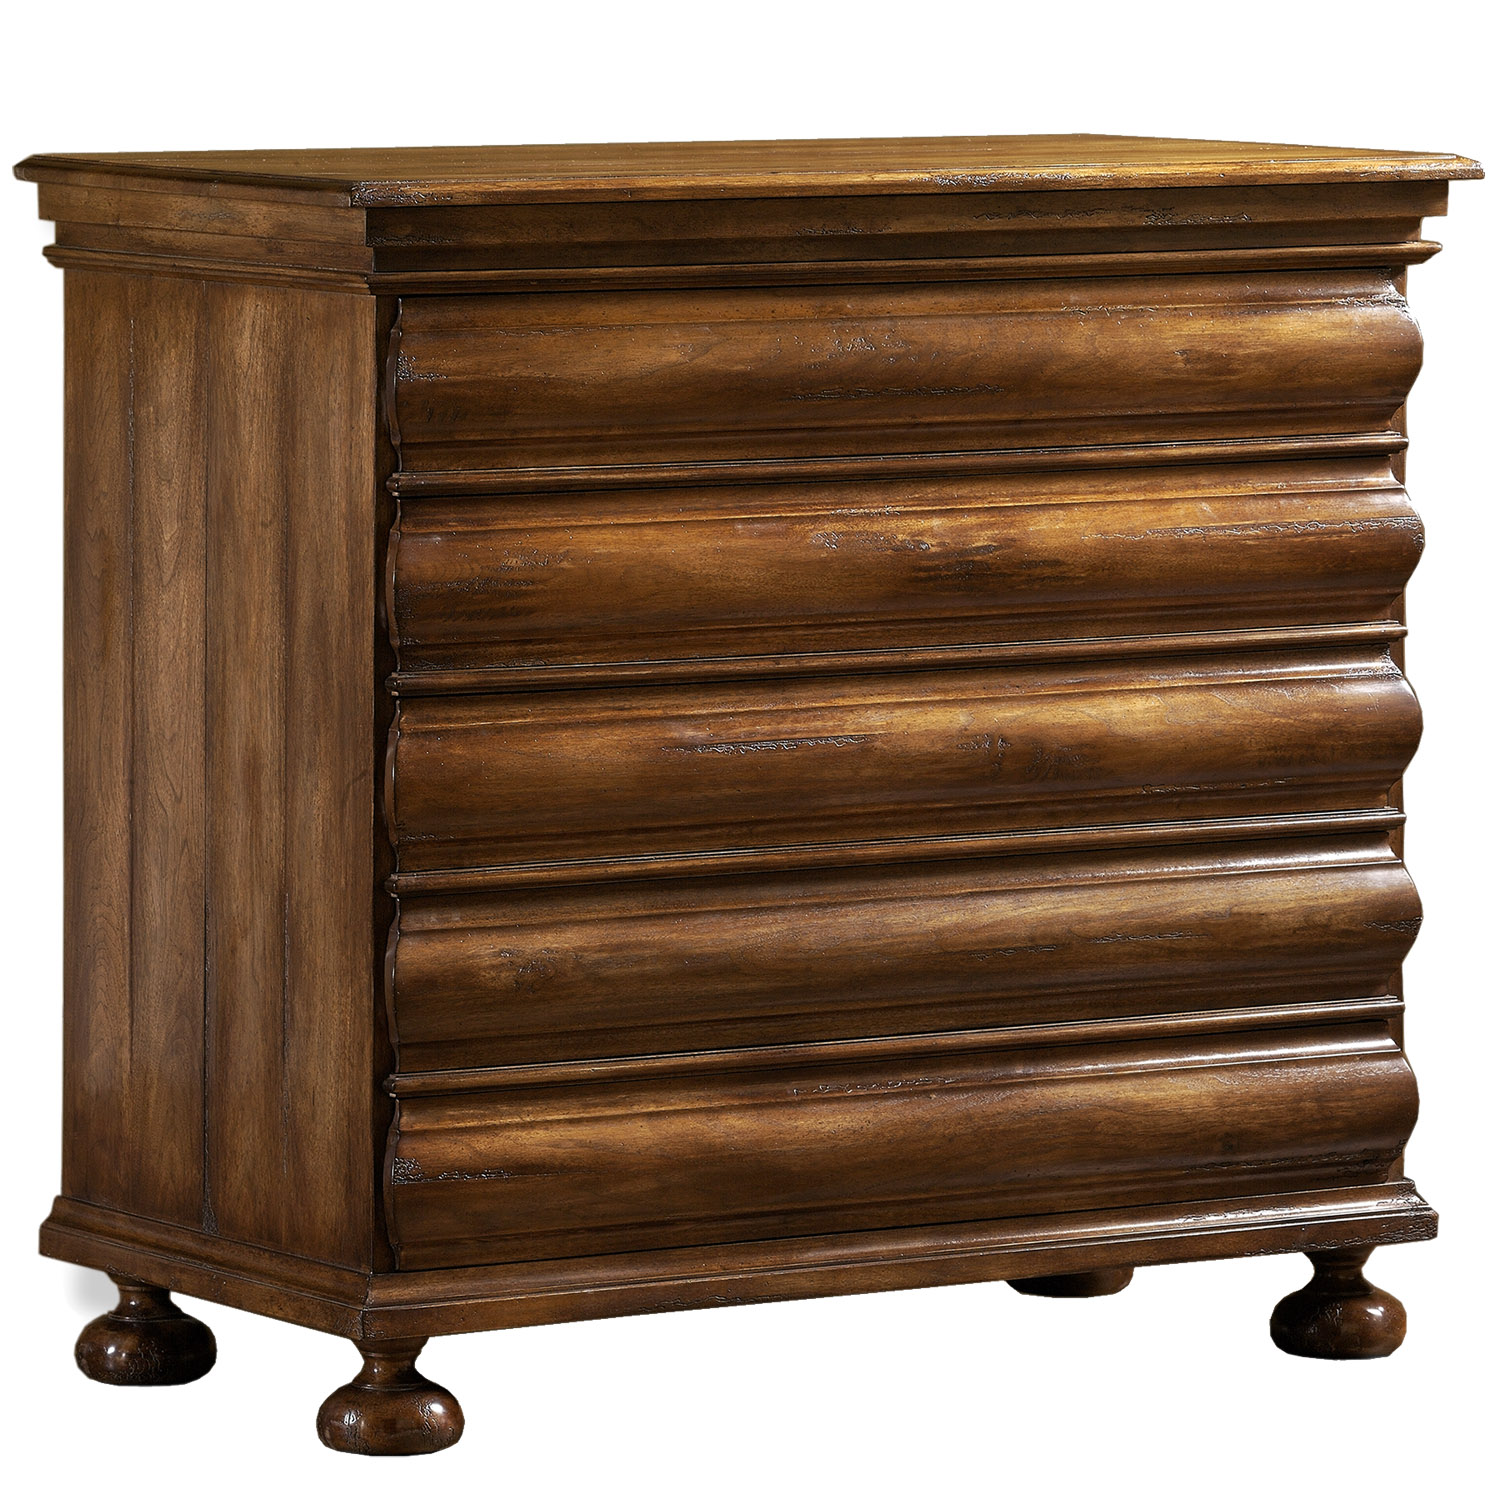 Borghese traditional antique replication chest of drawers dresser by Woodland Furniture in Idaho Falls